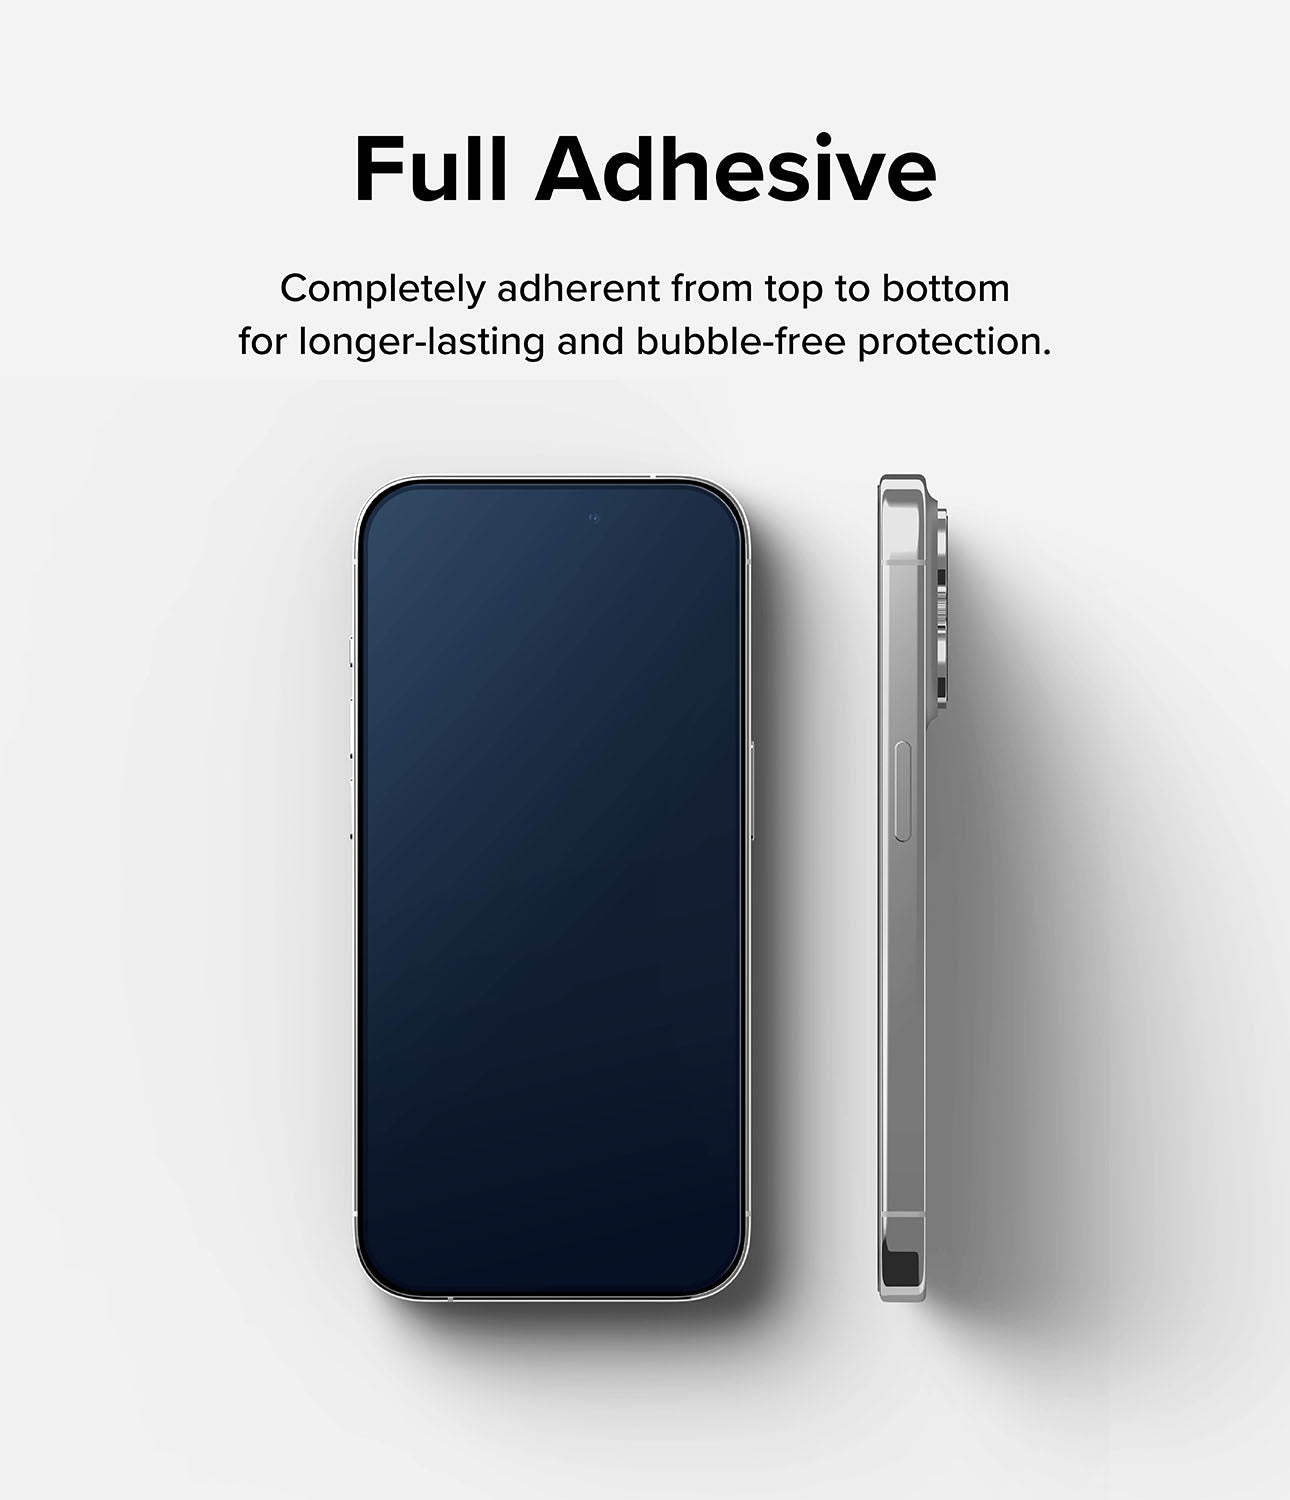 iPhone 15 Pro Screen Protector | Full Cover Glass Premium edge-to-edge 9H hardness tempered glass protector